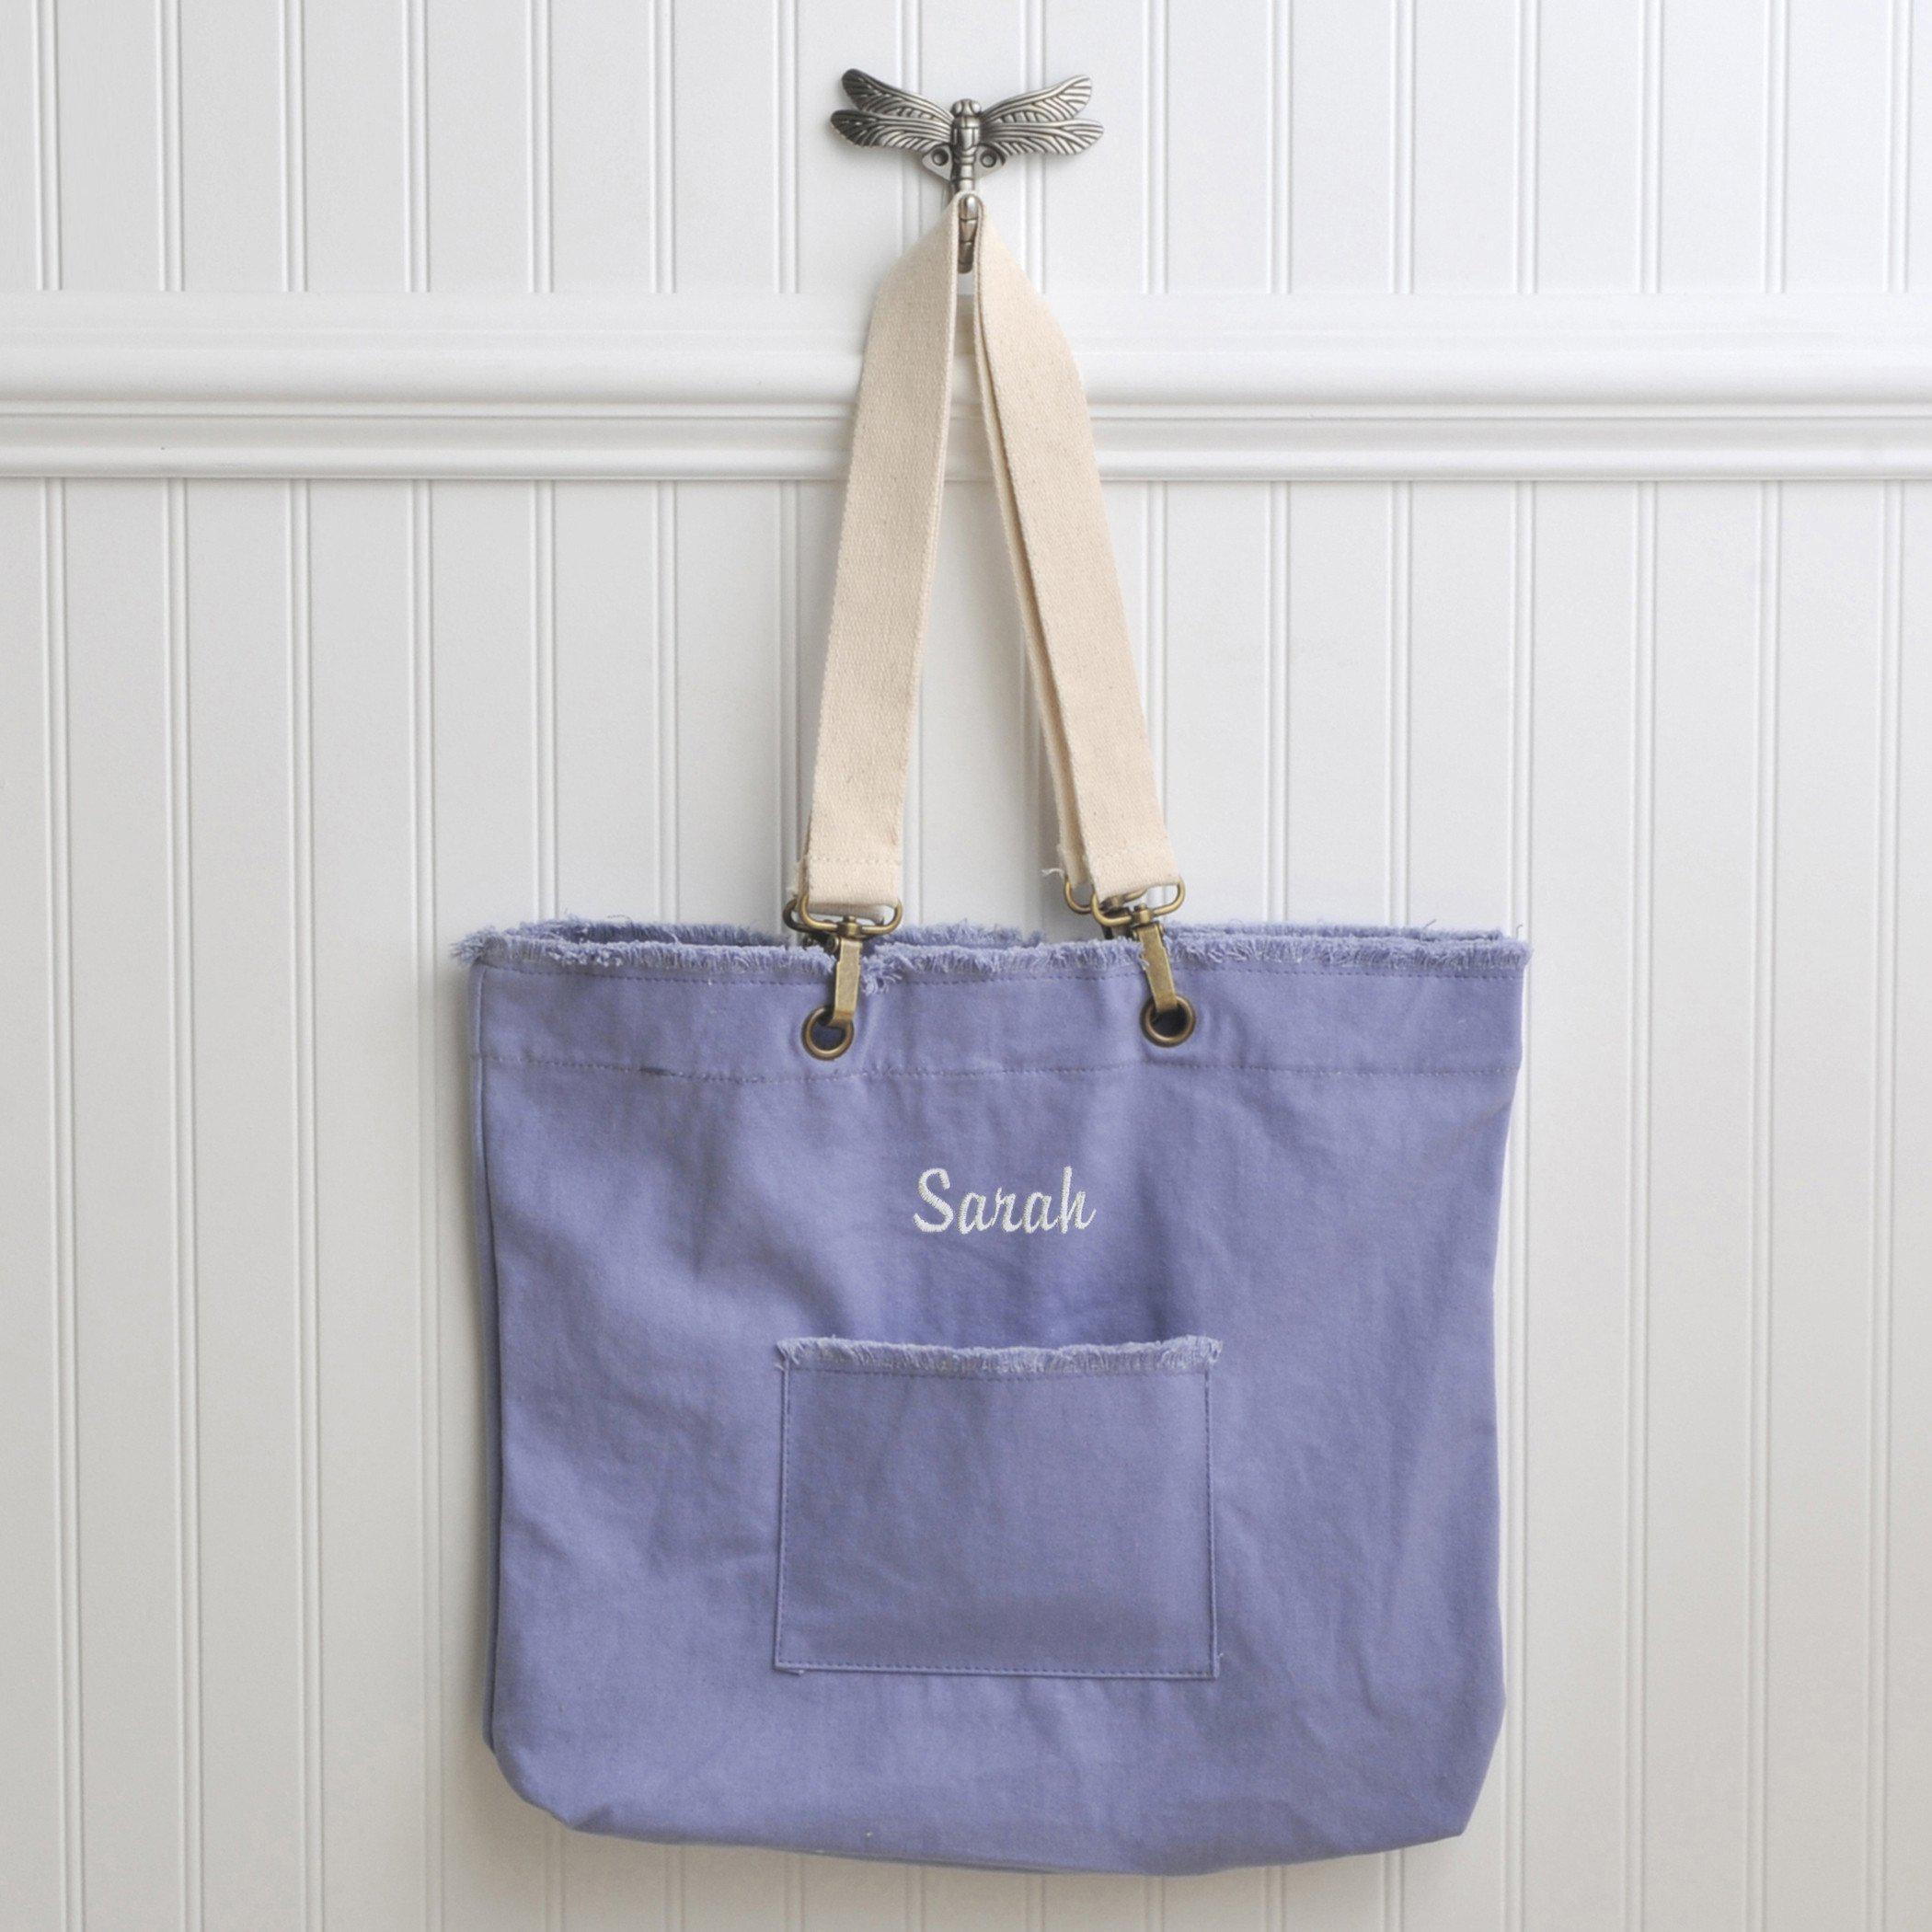 Personalized Canvas Tote Bag - Choose from 4 Colors